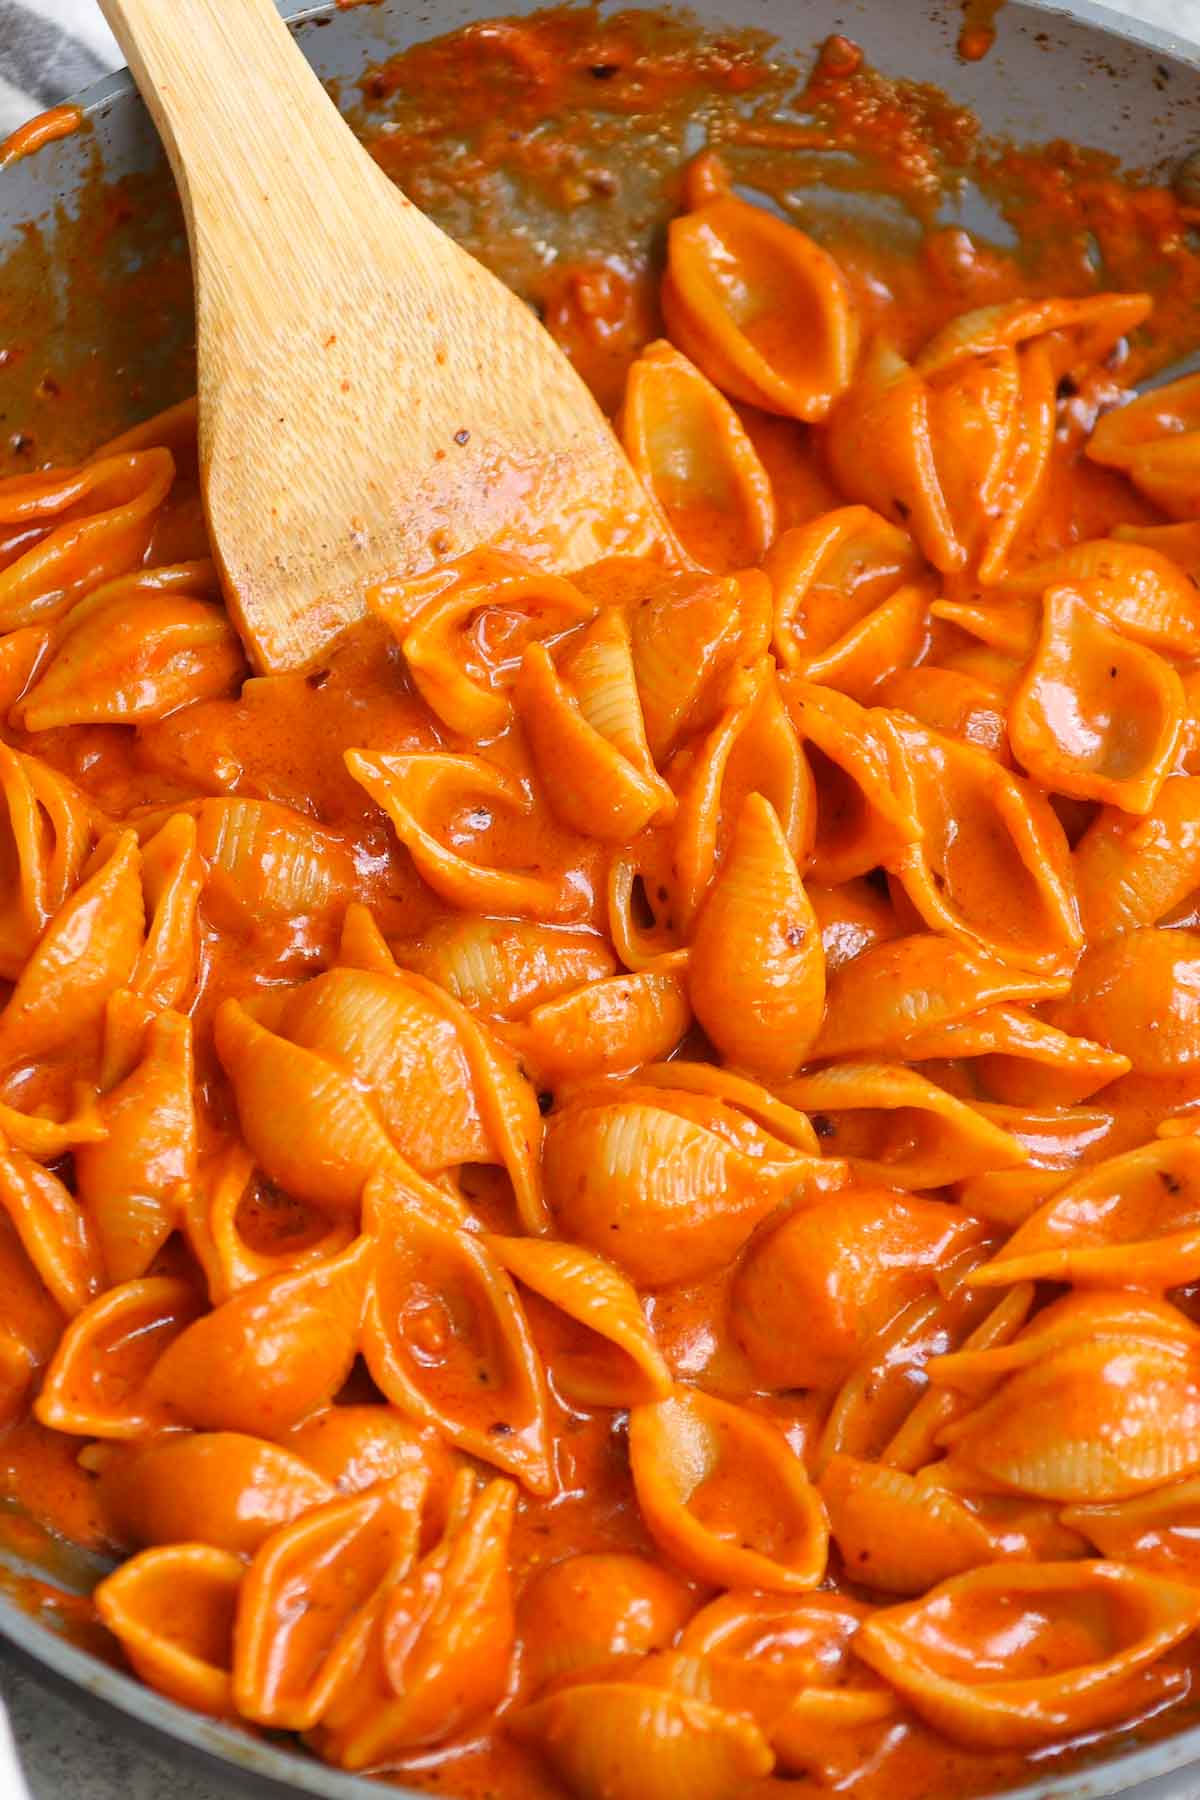 How to Make Vodka Sauce Without Vodka? 